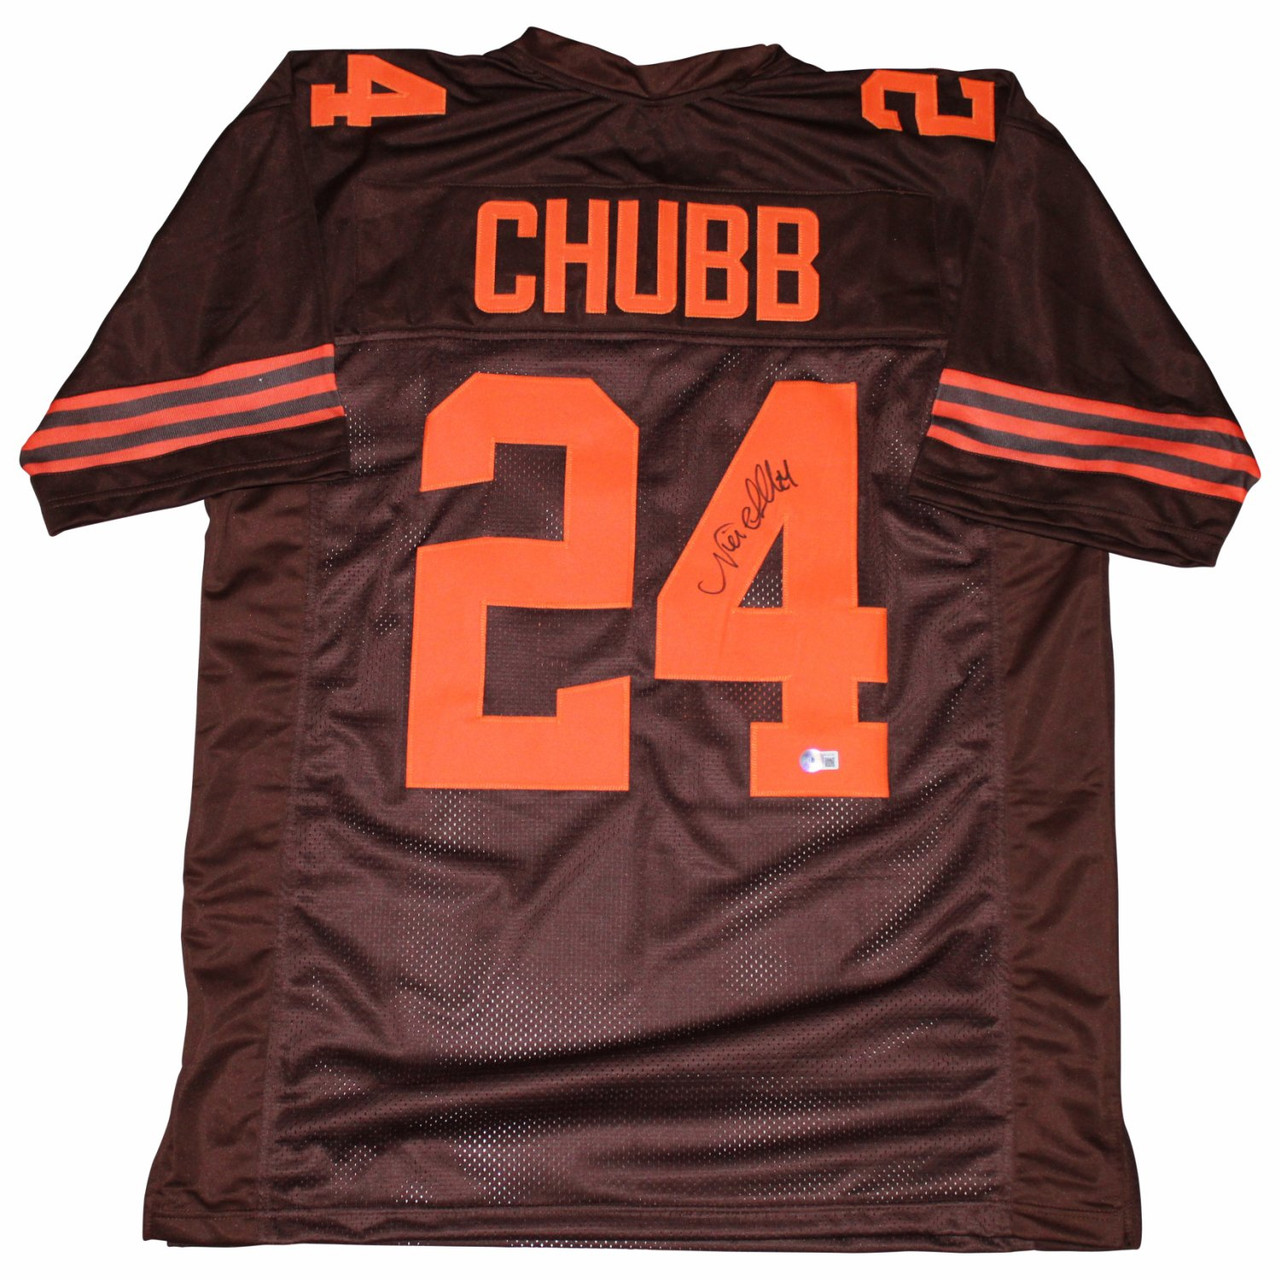 cleveland browns authentic jersey